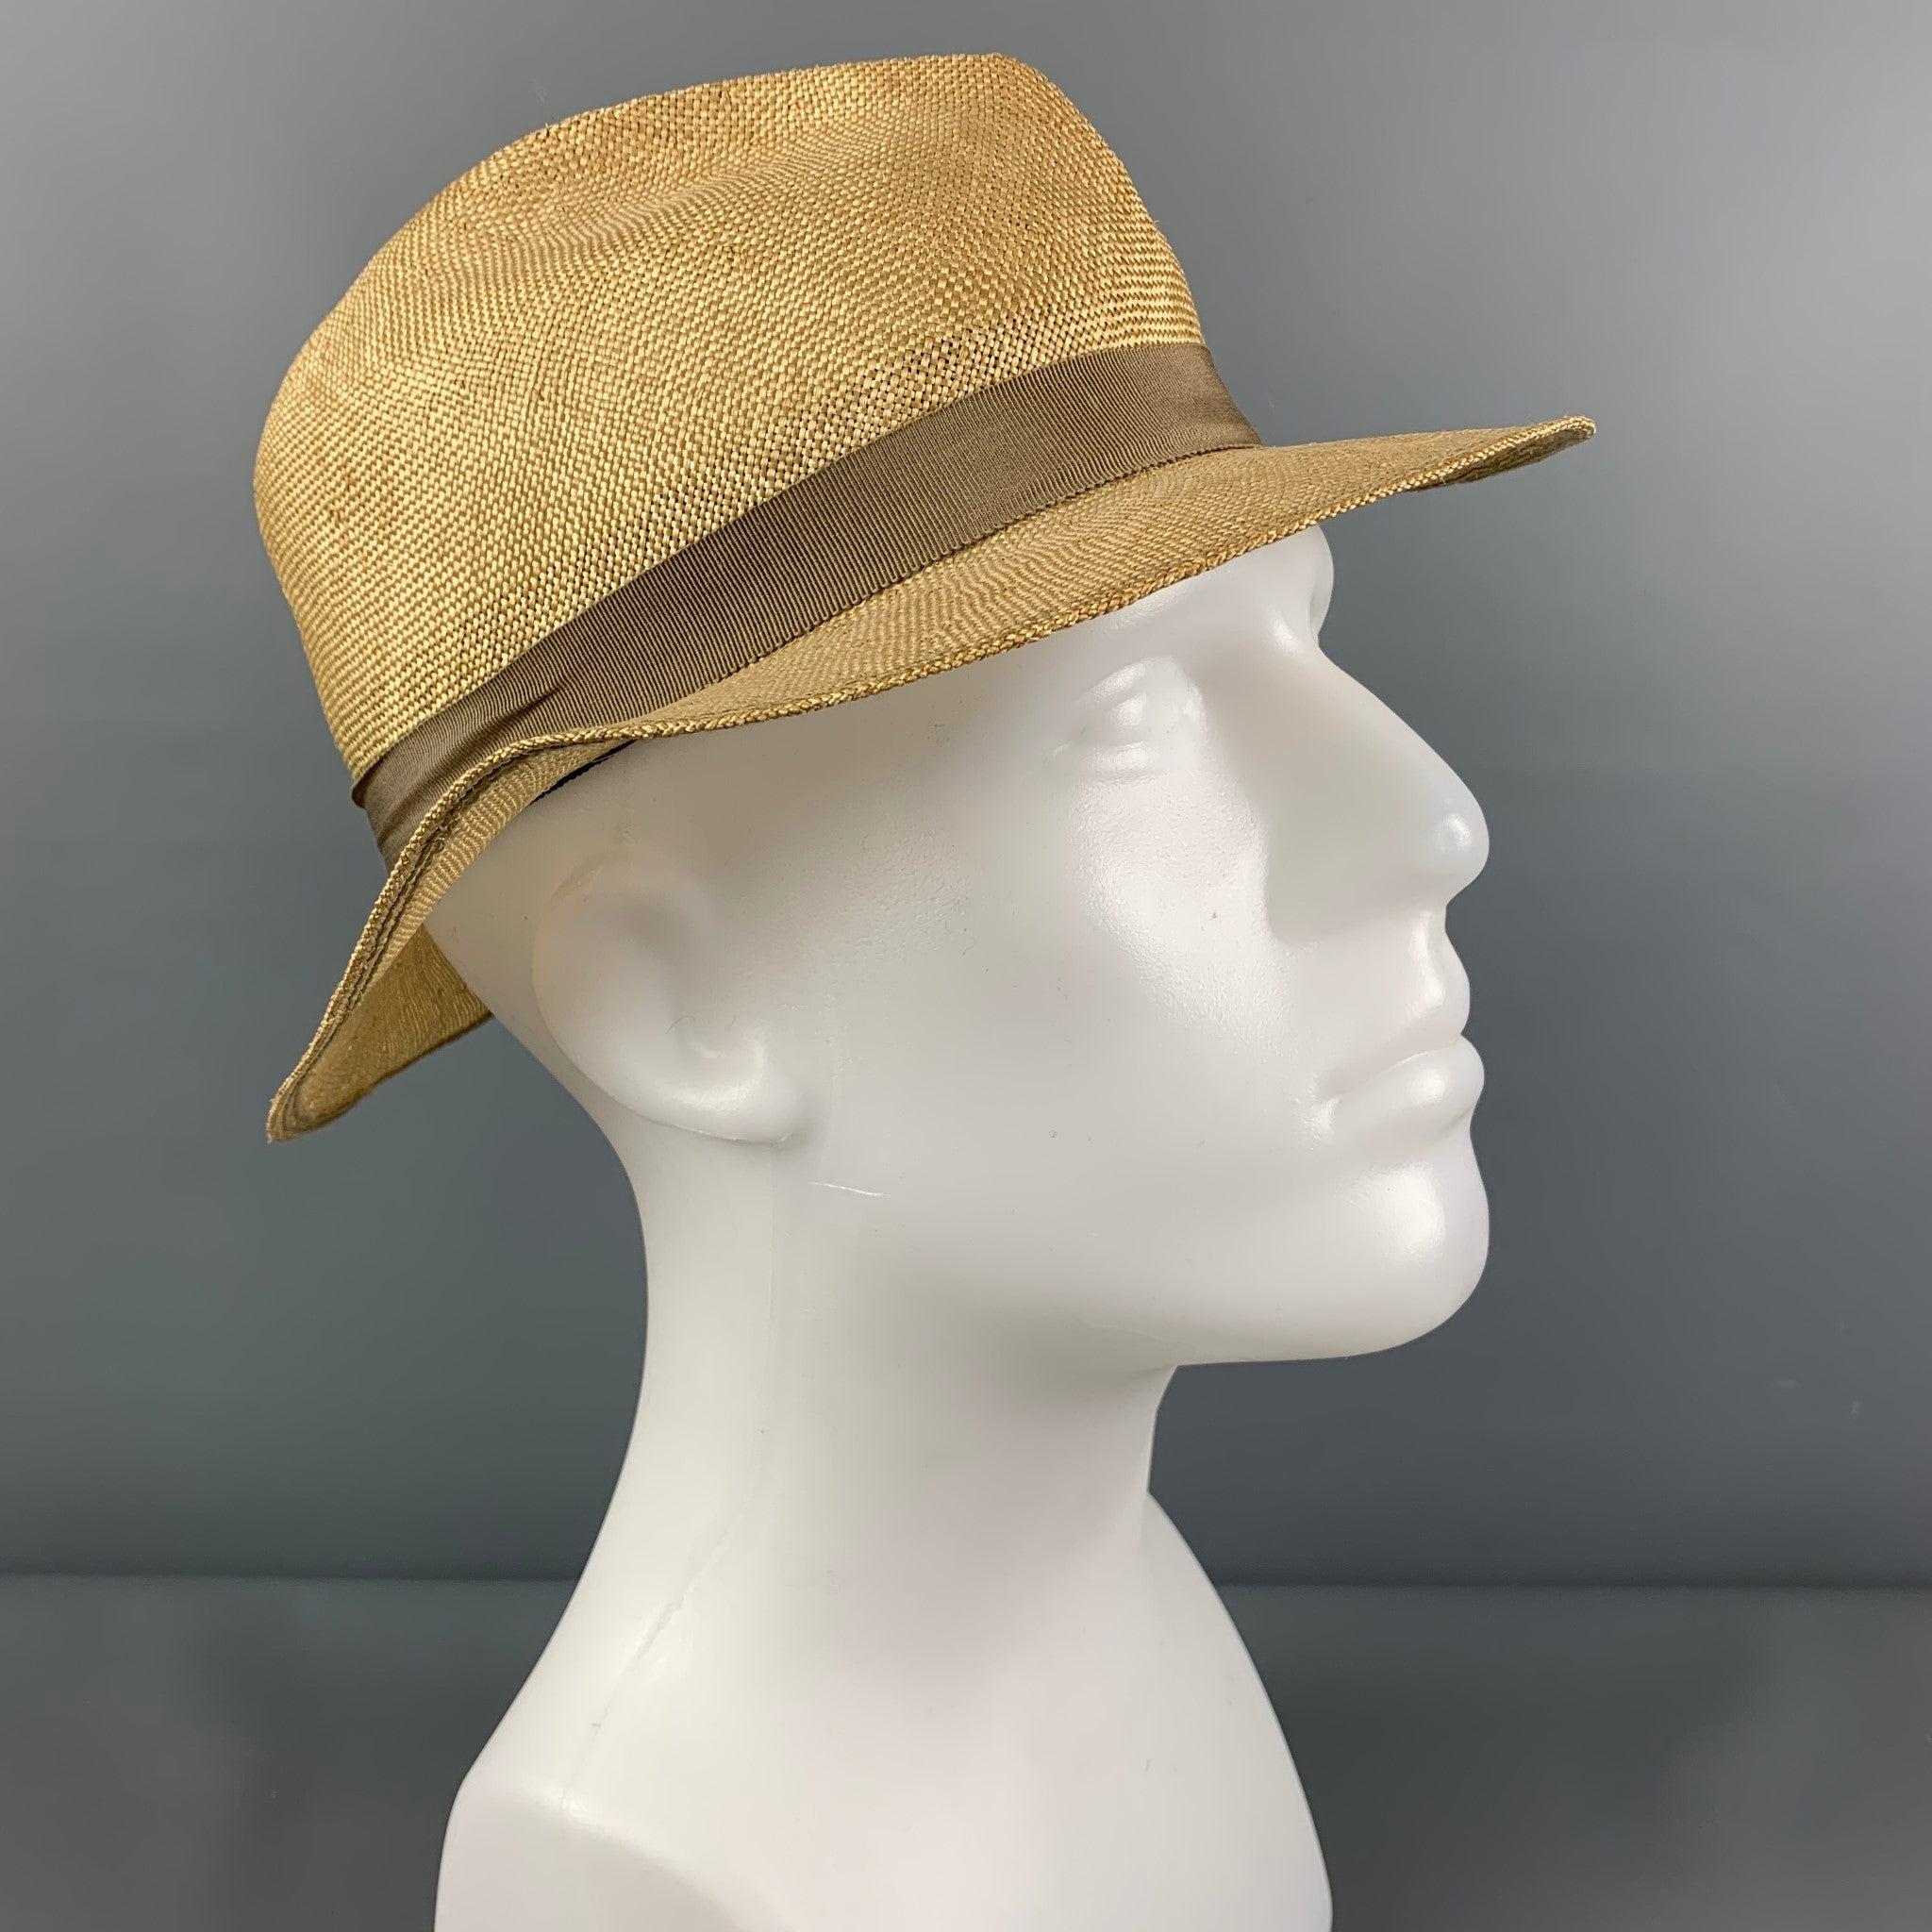 Vintage PAUL STUART hat comes in a beige straw featuring a fedora style and a tan ribbon trim.
Very Good
Pre-Owned Condition. Fabric tag removed.  

Marked:   Size tag removed  

Measurements: 
  Opening: 23 inches  Brim: 2 inches  Height: 4.5